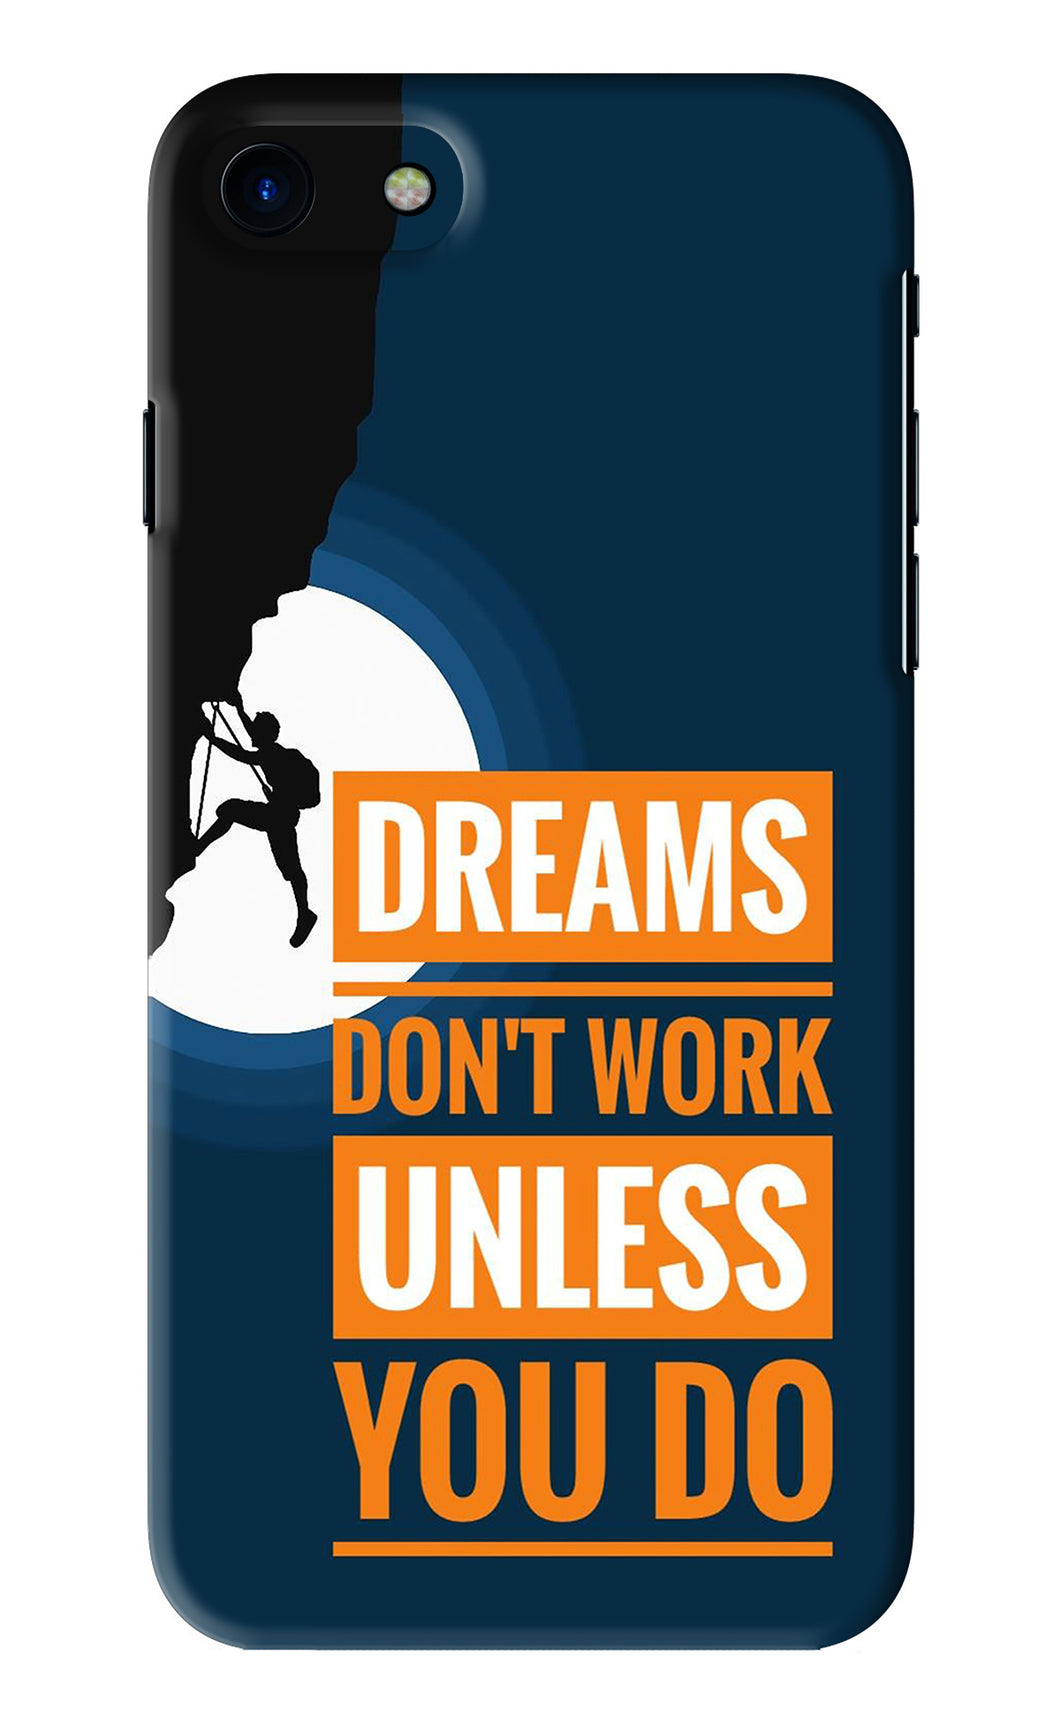 Dreams Don’T Work Unless You Do iPhone 8 Back Skin Wrap